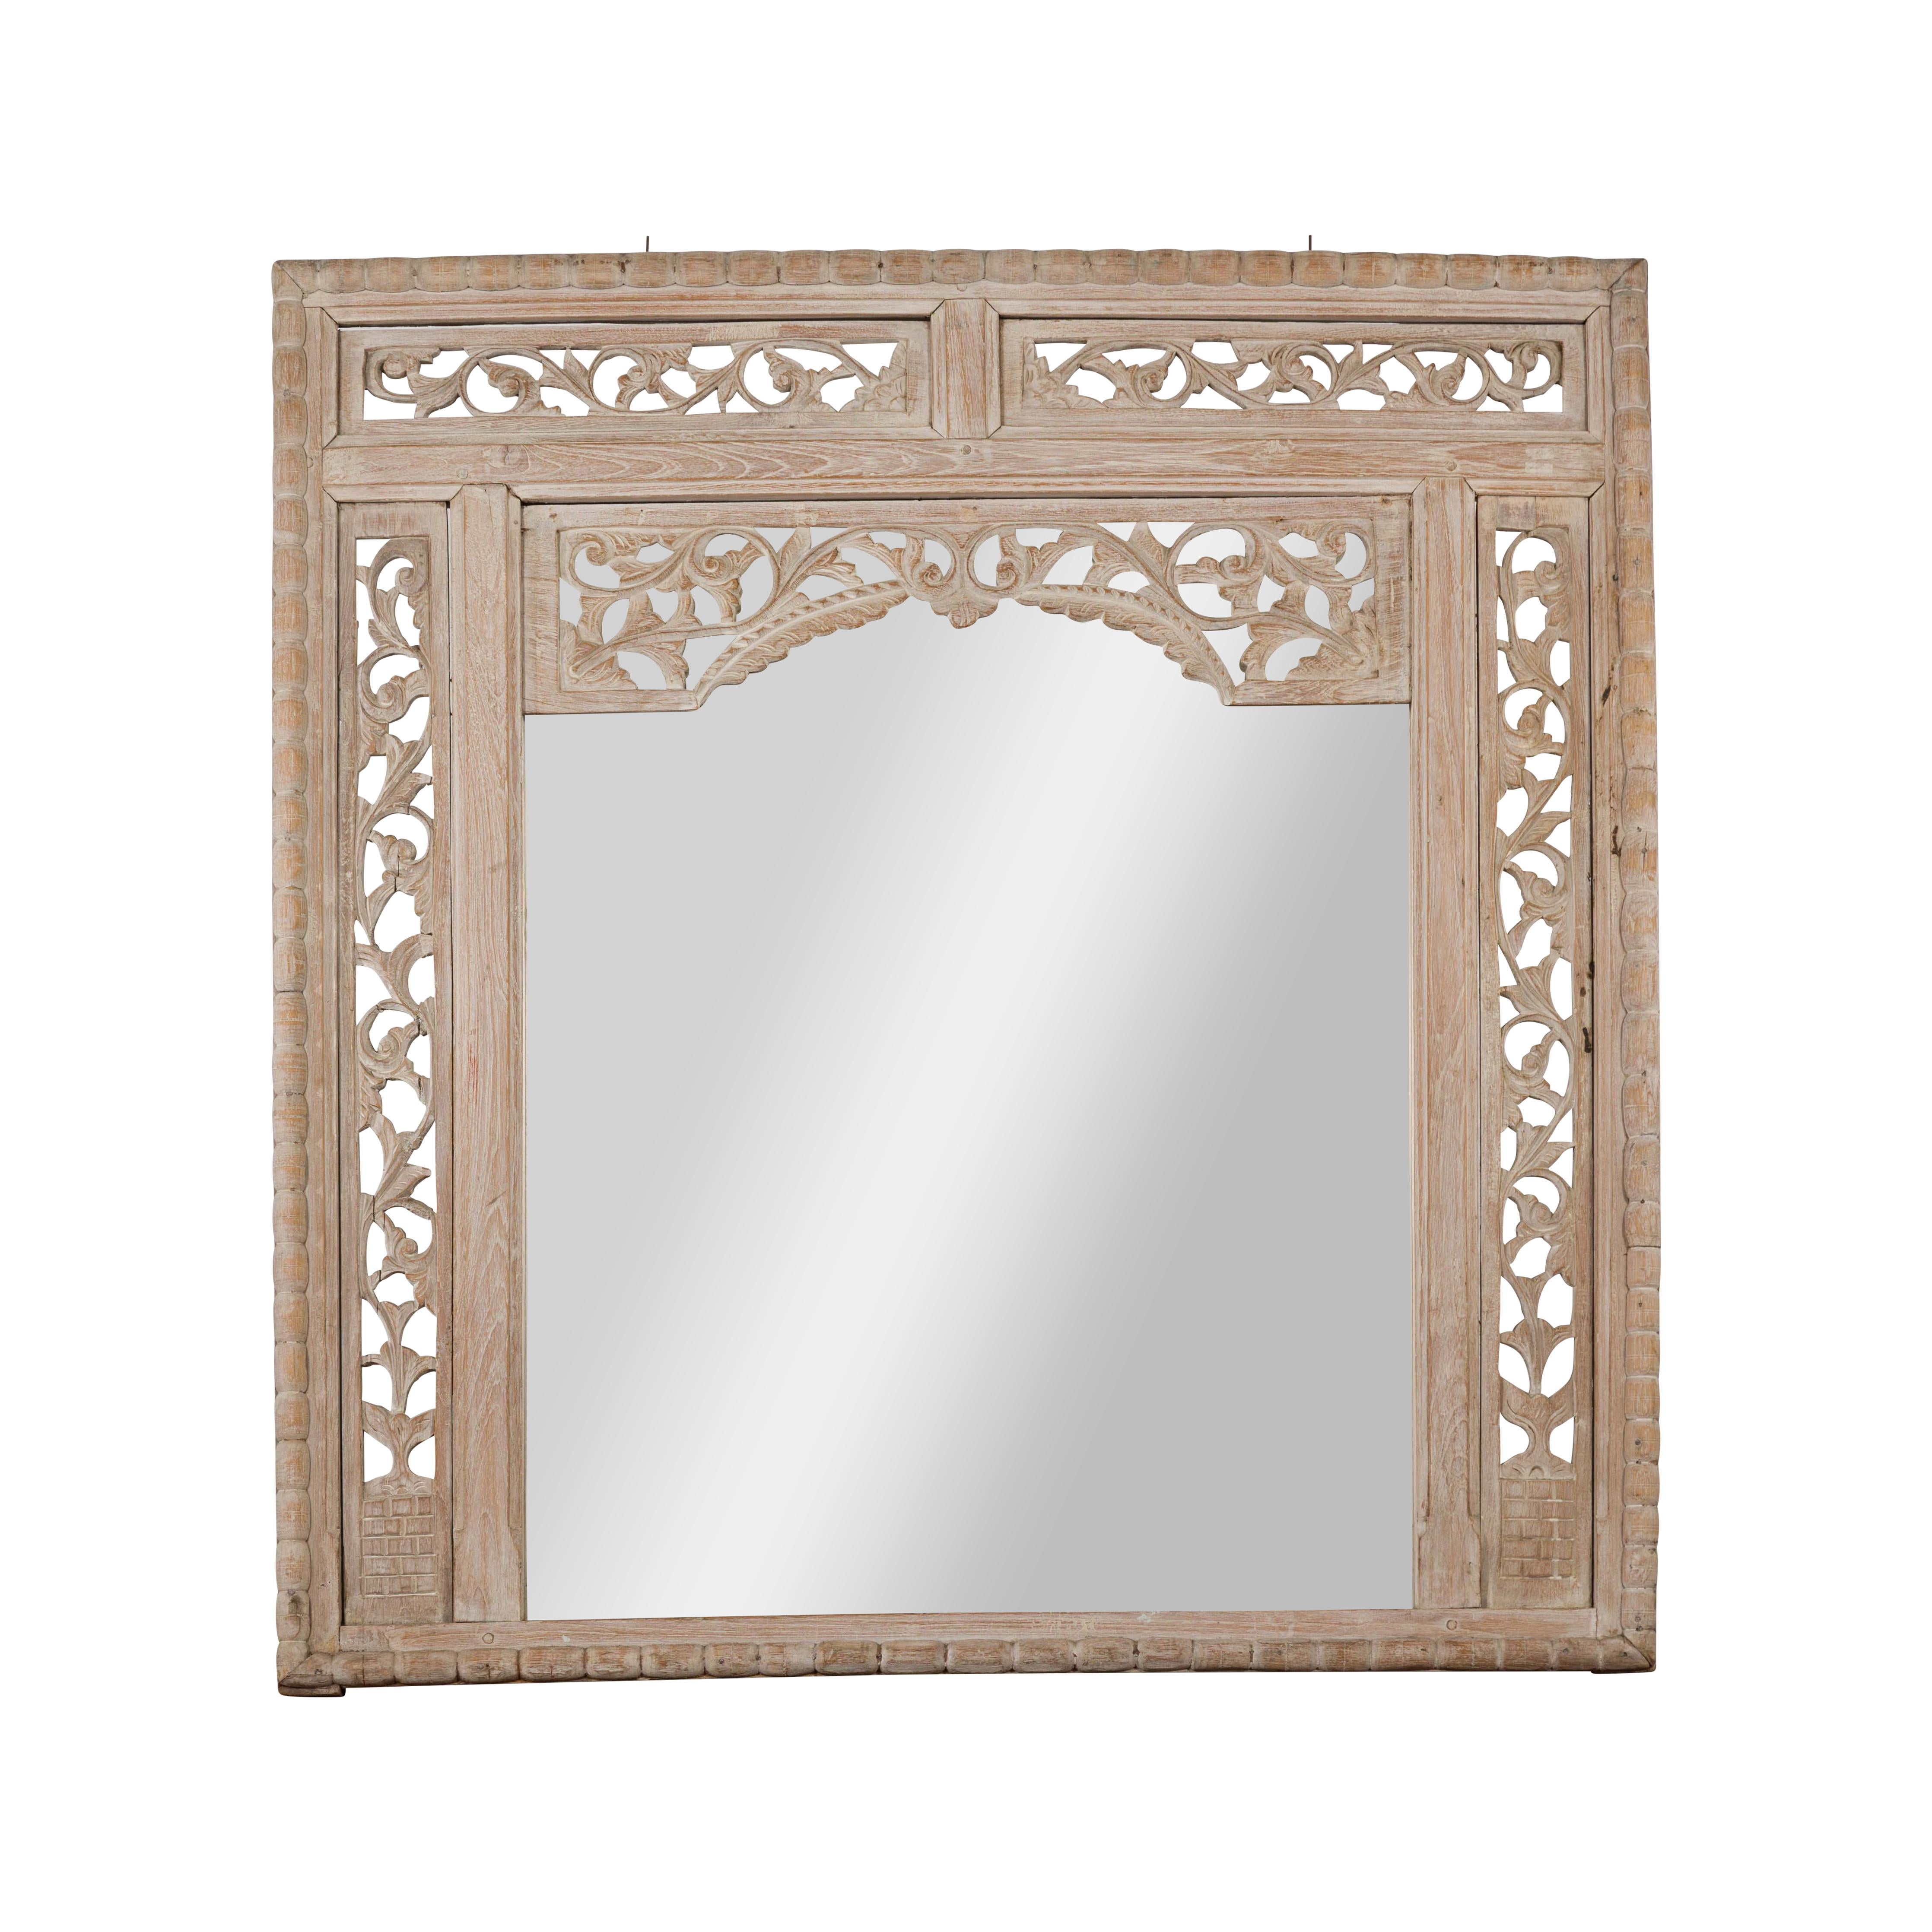 19th Century Antique Mirror with Carved Wooden Frame For Sale 9